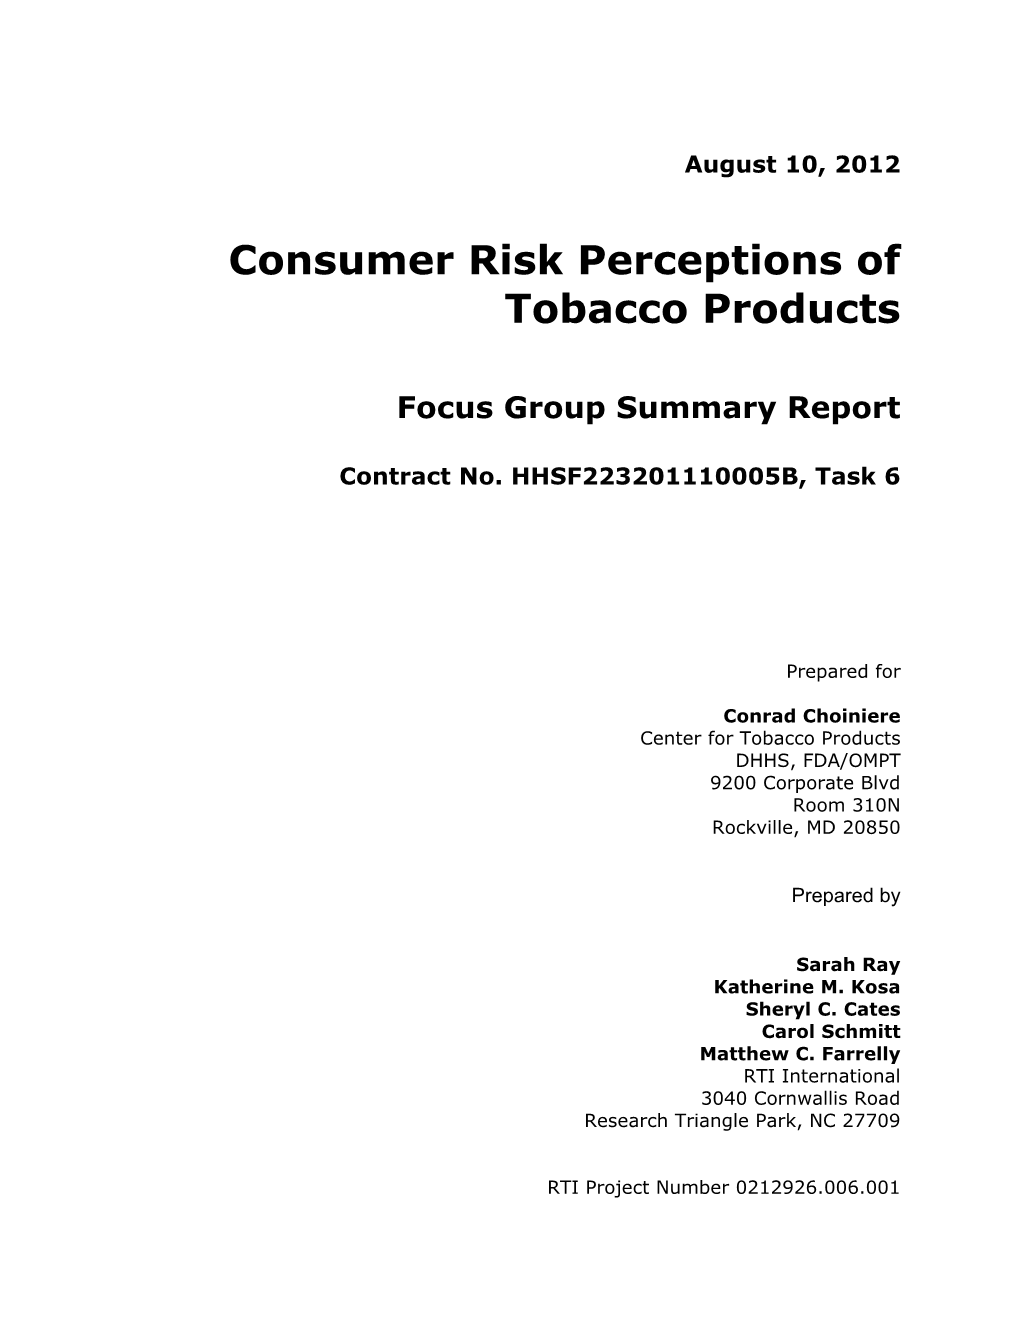 Consumer Risk Perceptions of Tobacco Products